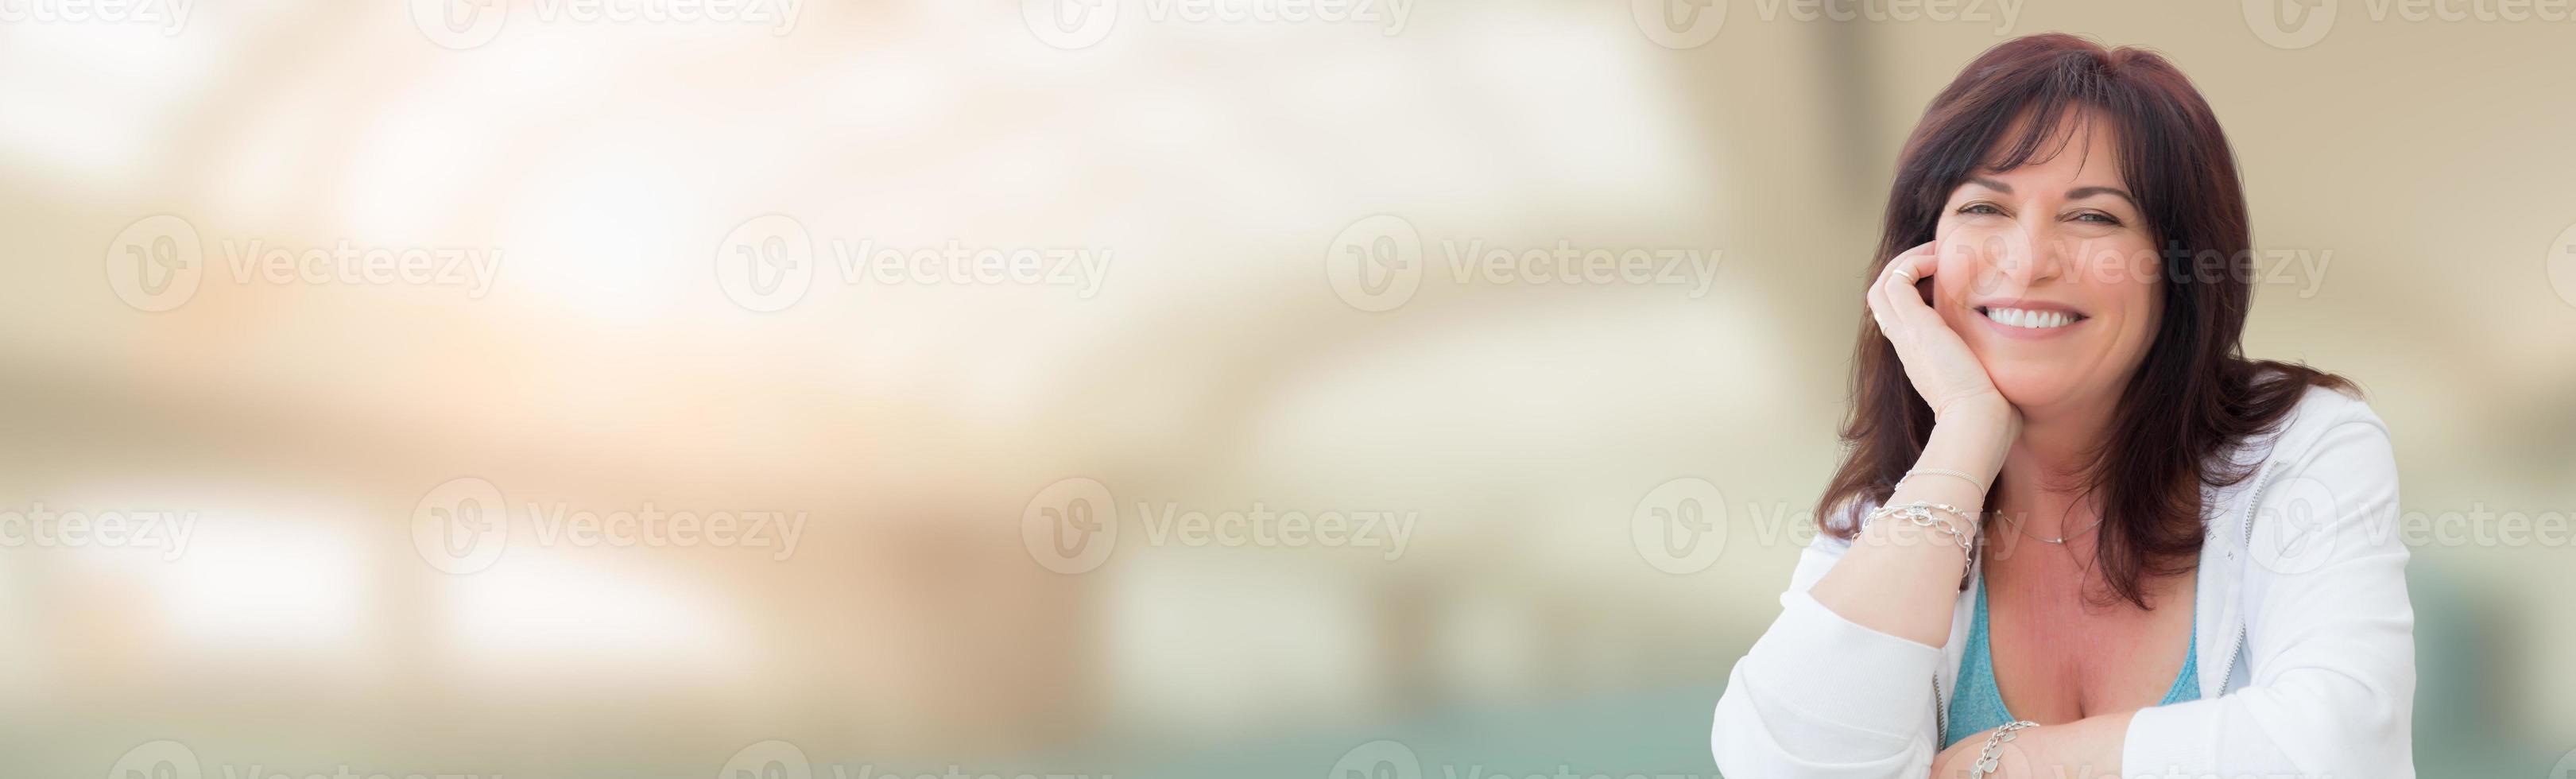 Banner of Middle Aged Woman With Abstract Building Background photo